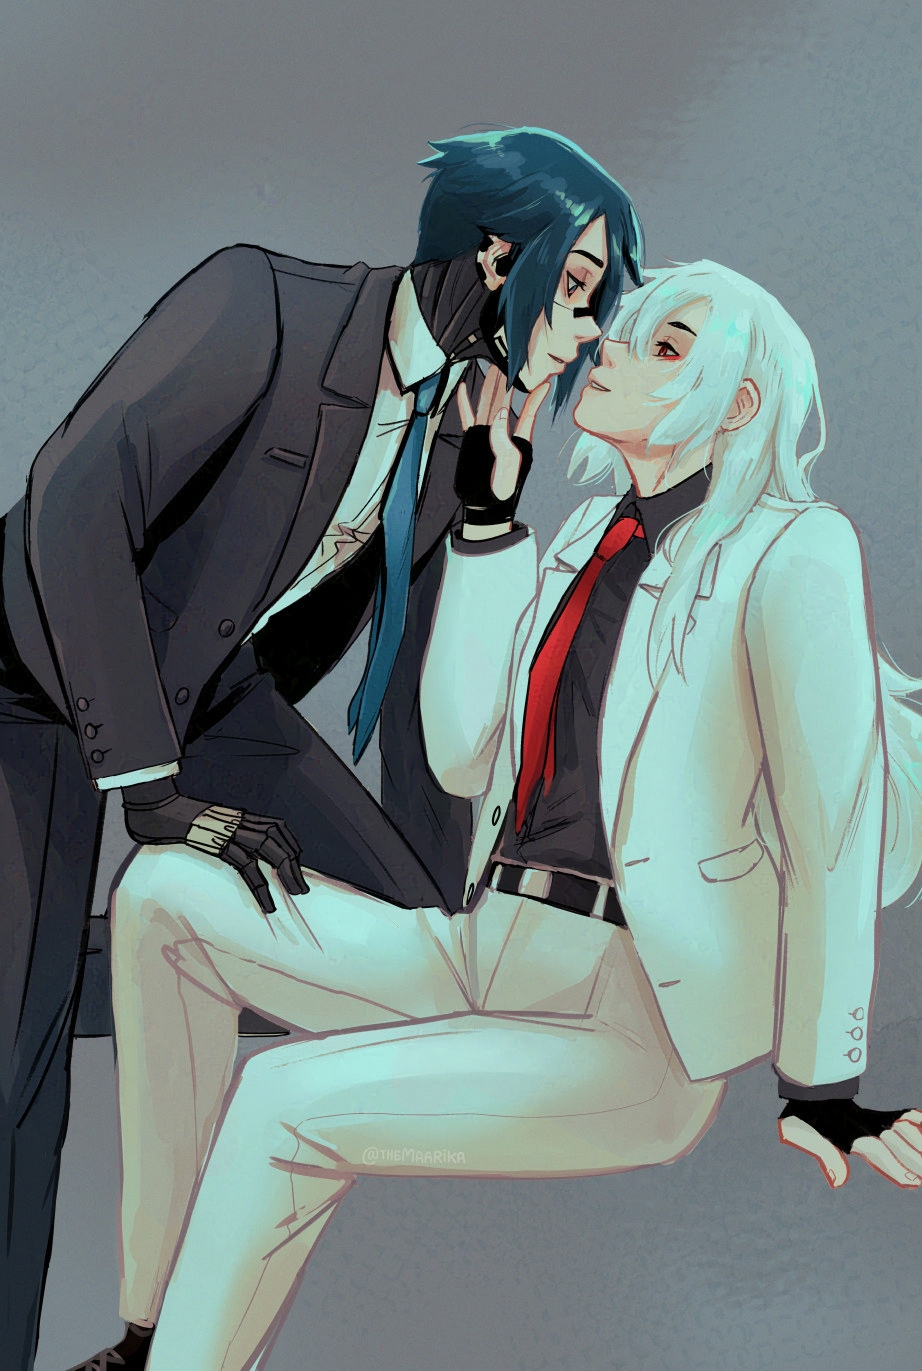 Fanart of Elster and Ariane from SIGNALIS staring into each other's eyes, almost kissing. Both of them are women dressed in suits but Elster is wearing a dark suit and white shirt with a blue tie. She has short dark hair and she is an android. Ariane is human with long white hair and she is wearing a white suit, a dark shirt and a red tie.